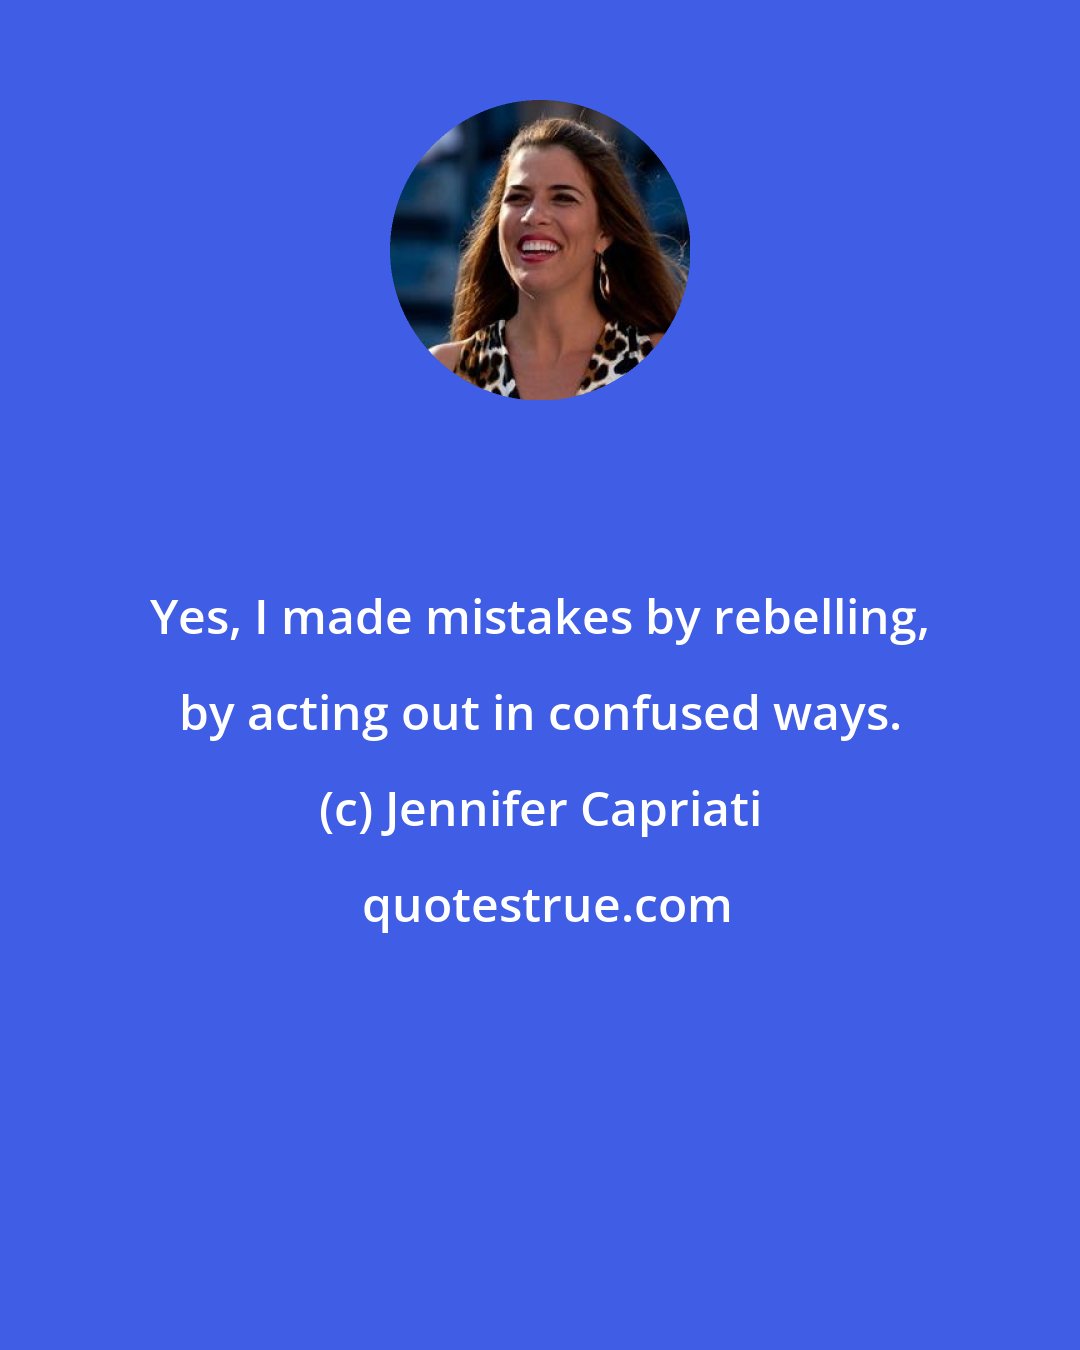 Jennifer Capriati: Yes, I made mistakes by rebelling, by acting out in confused ways.